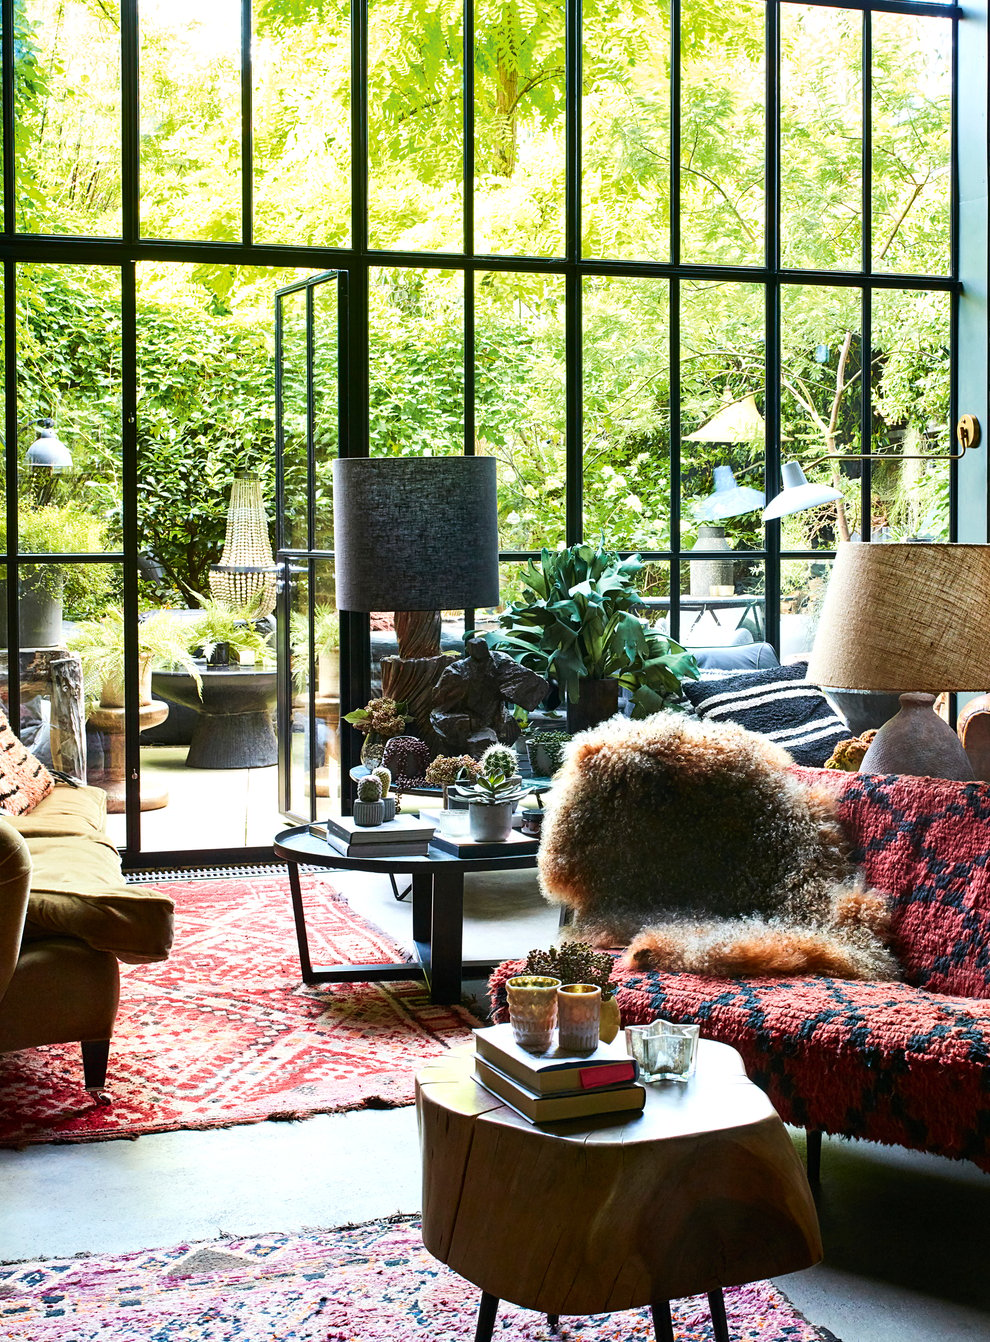 The texture filled lounge in designer Abigail Ahern's home